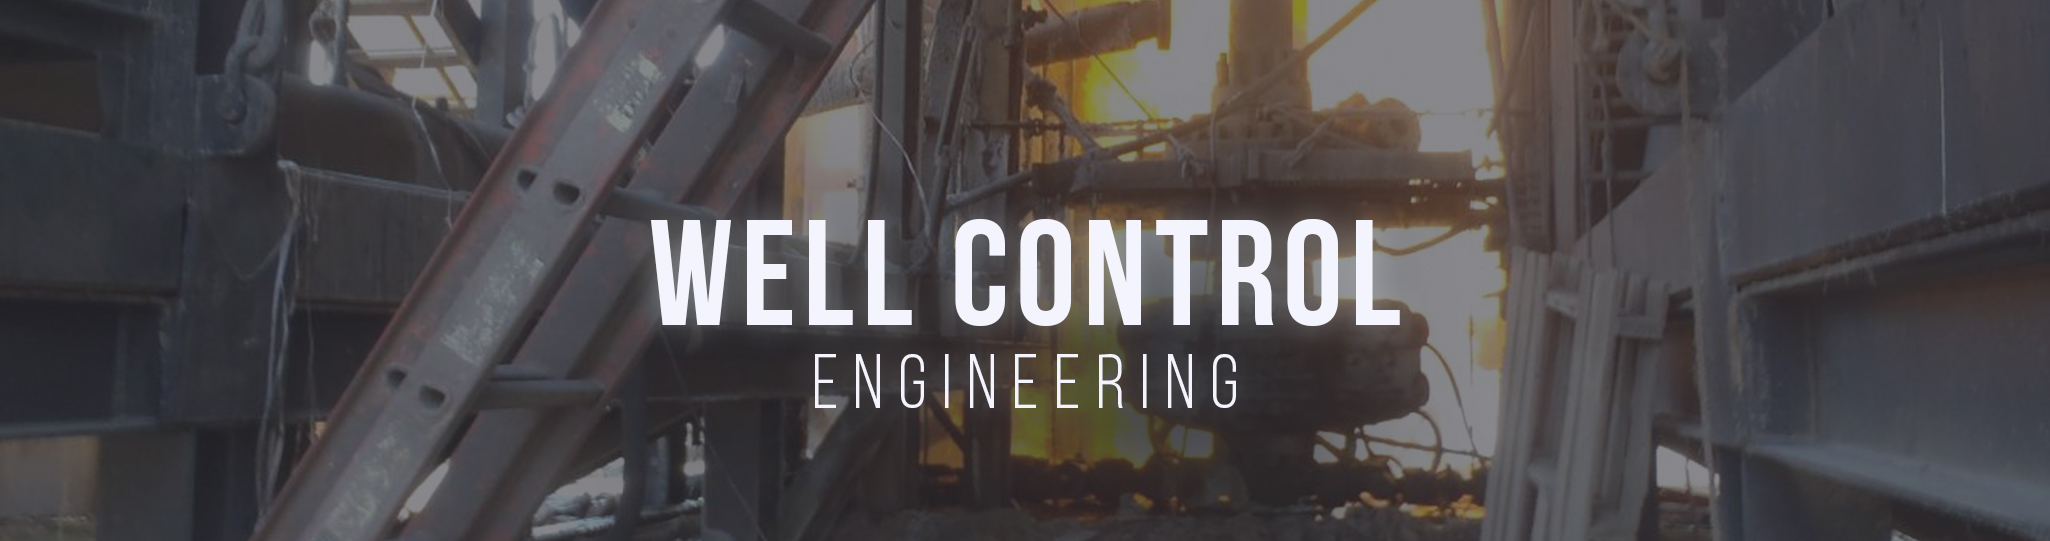 Well Control Engineering